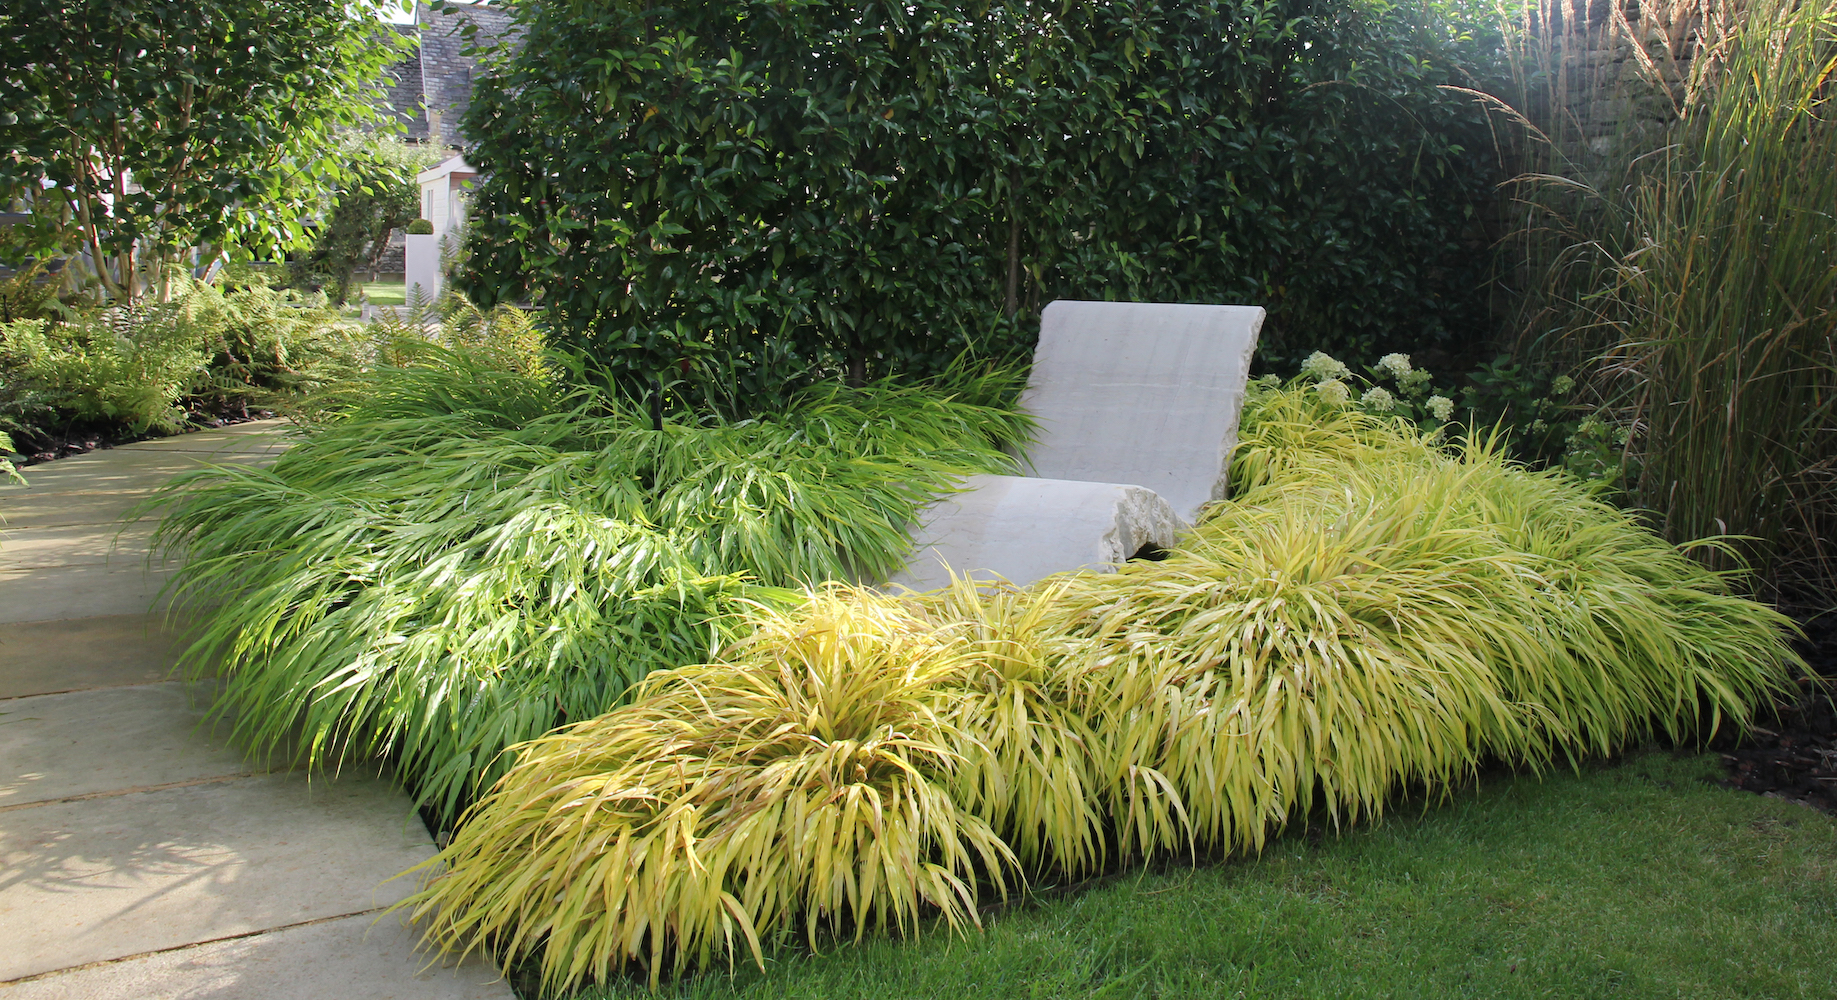 Zesty green Japanese forest grasses surrounding concrete sun lounger in spring time